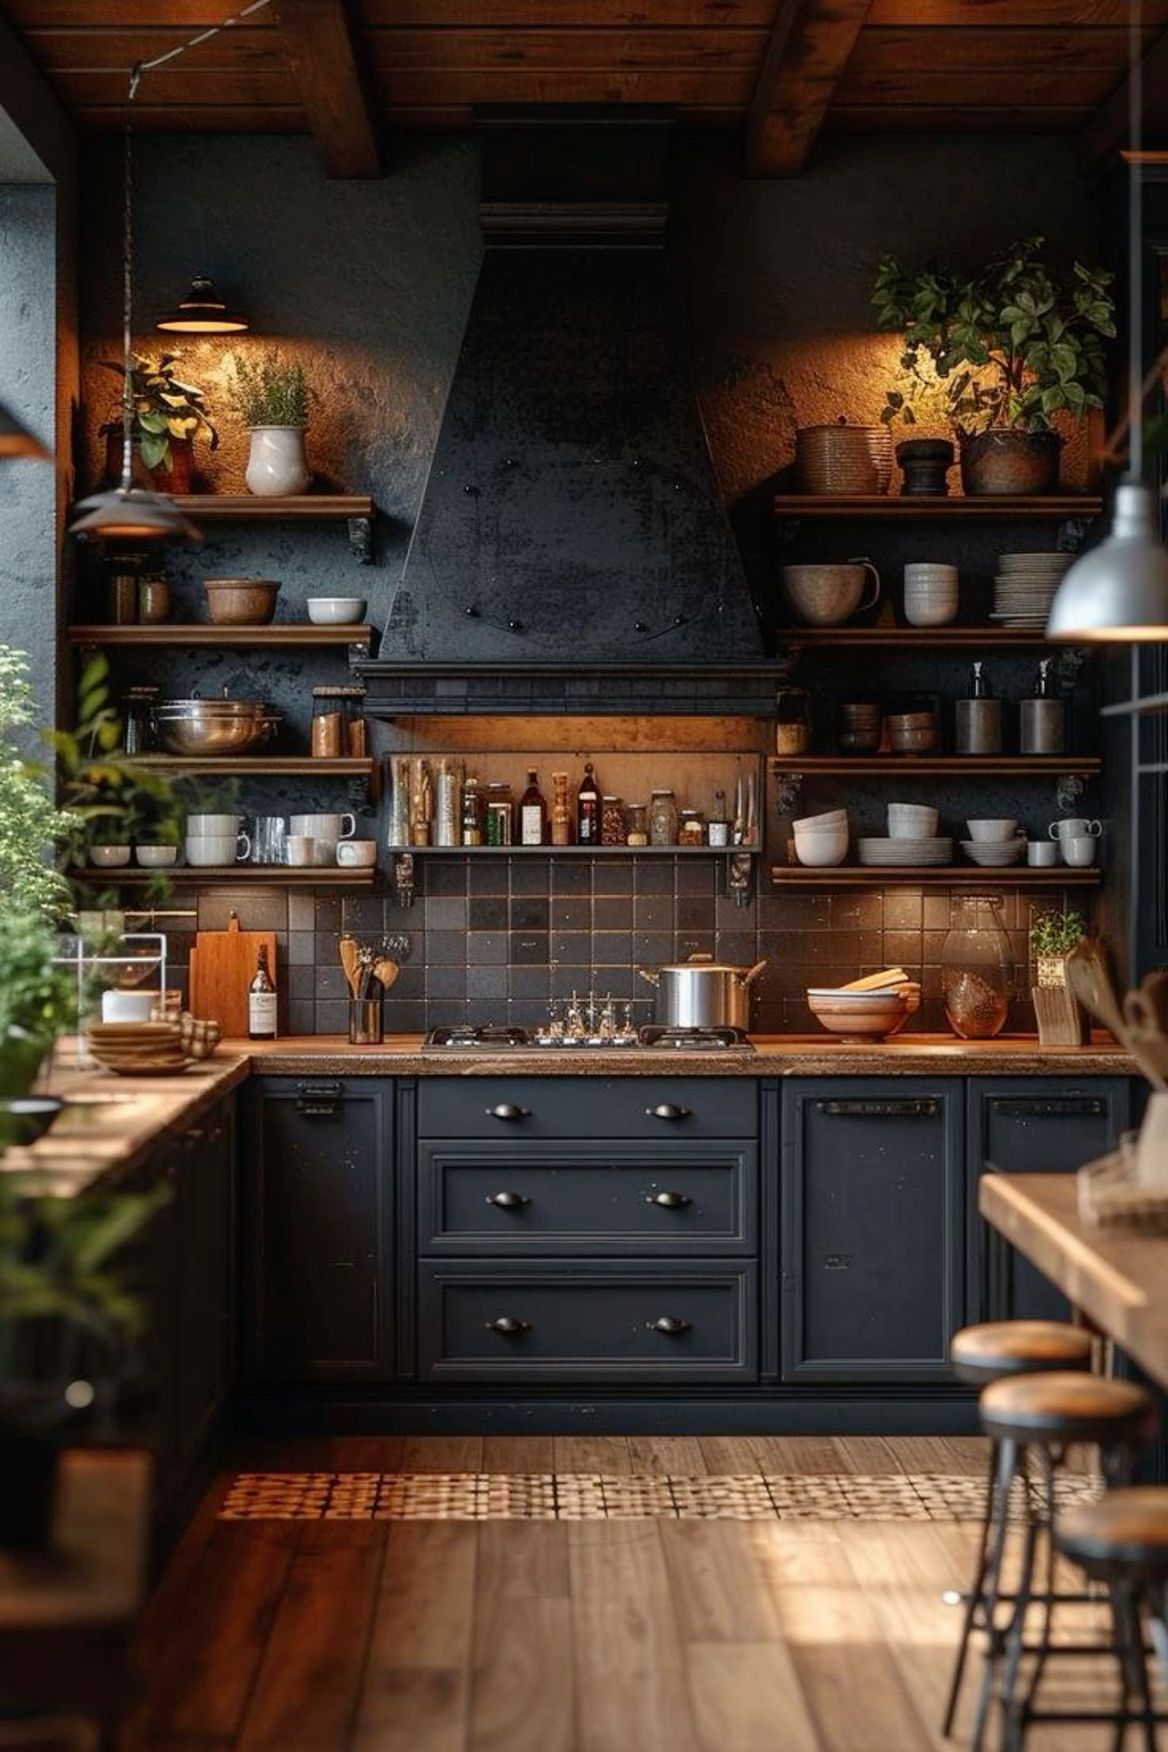 Embracing the Mood: How to Create a Moody
Kitchen that Reflects Your Style